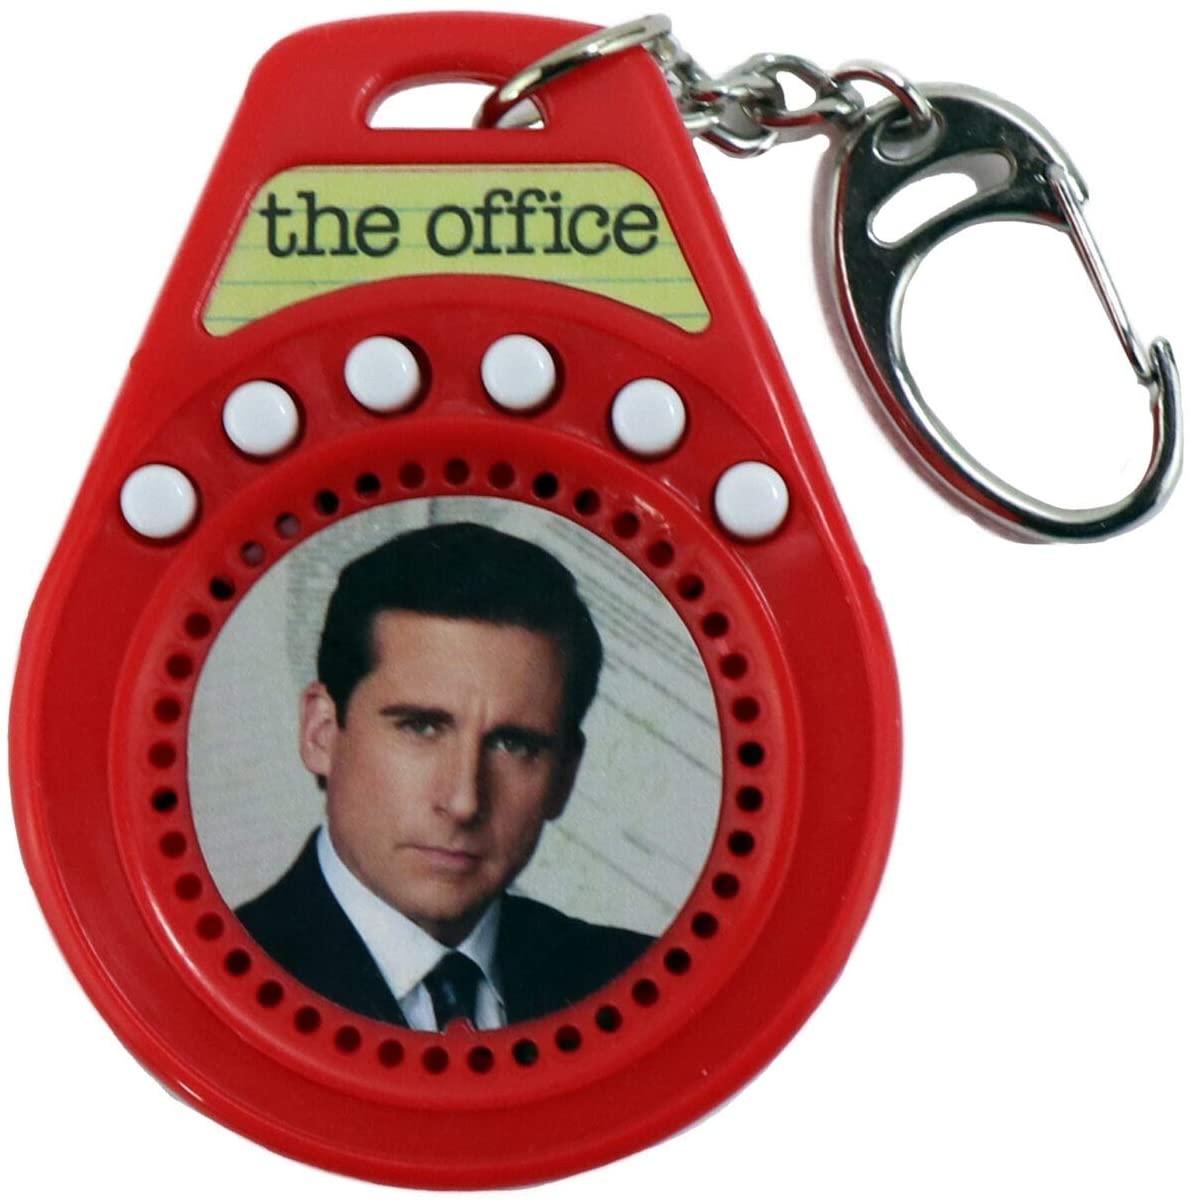 World's Coolest The Office - Michael